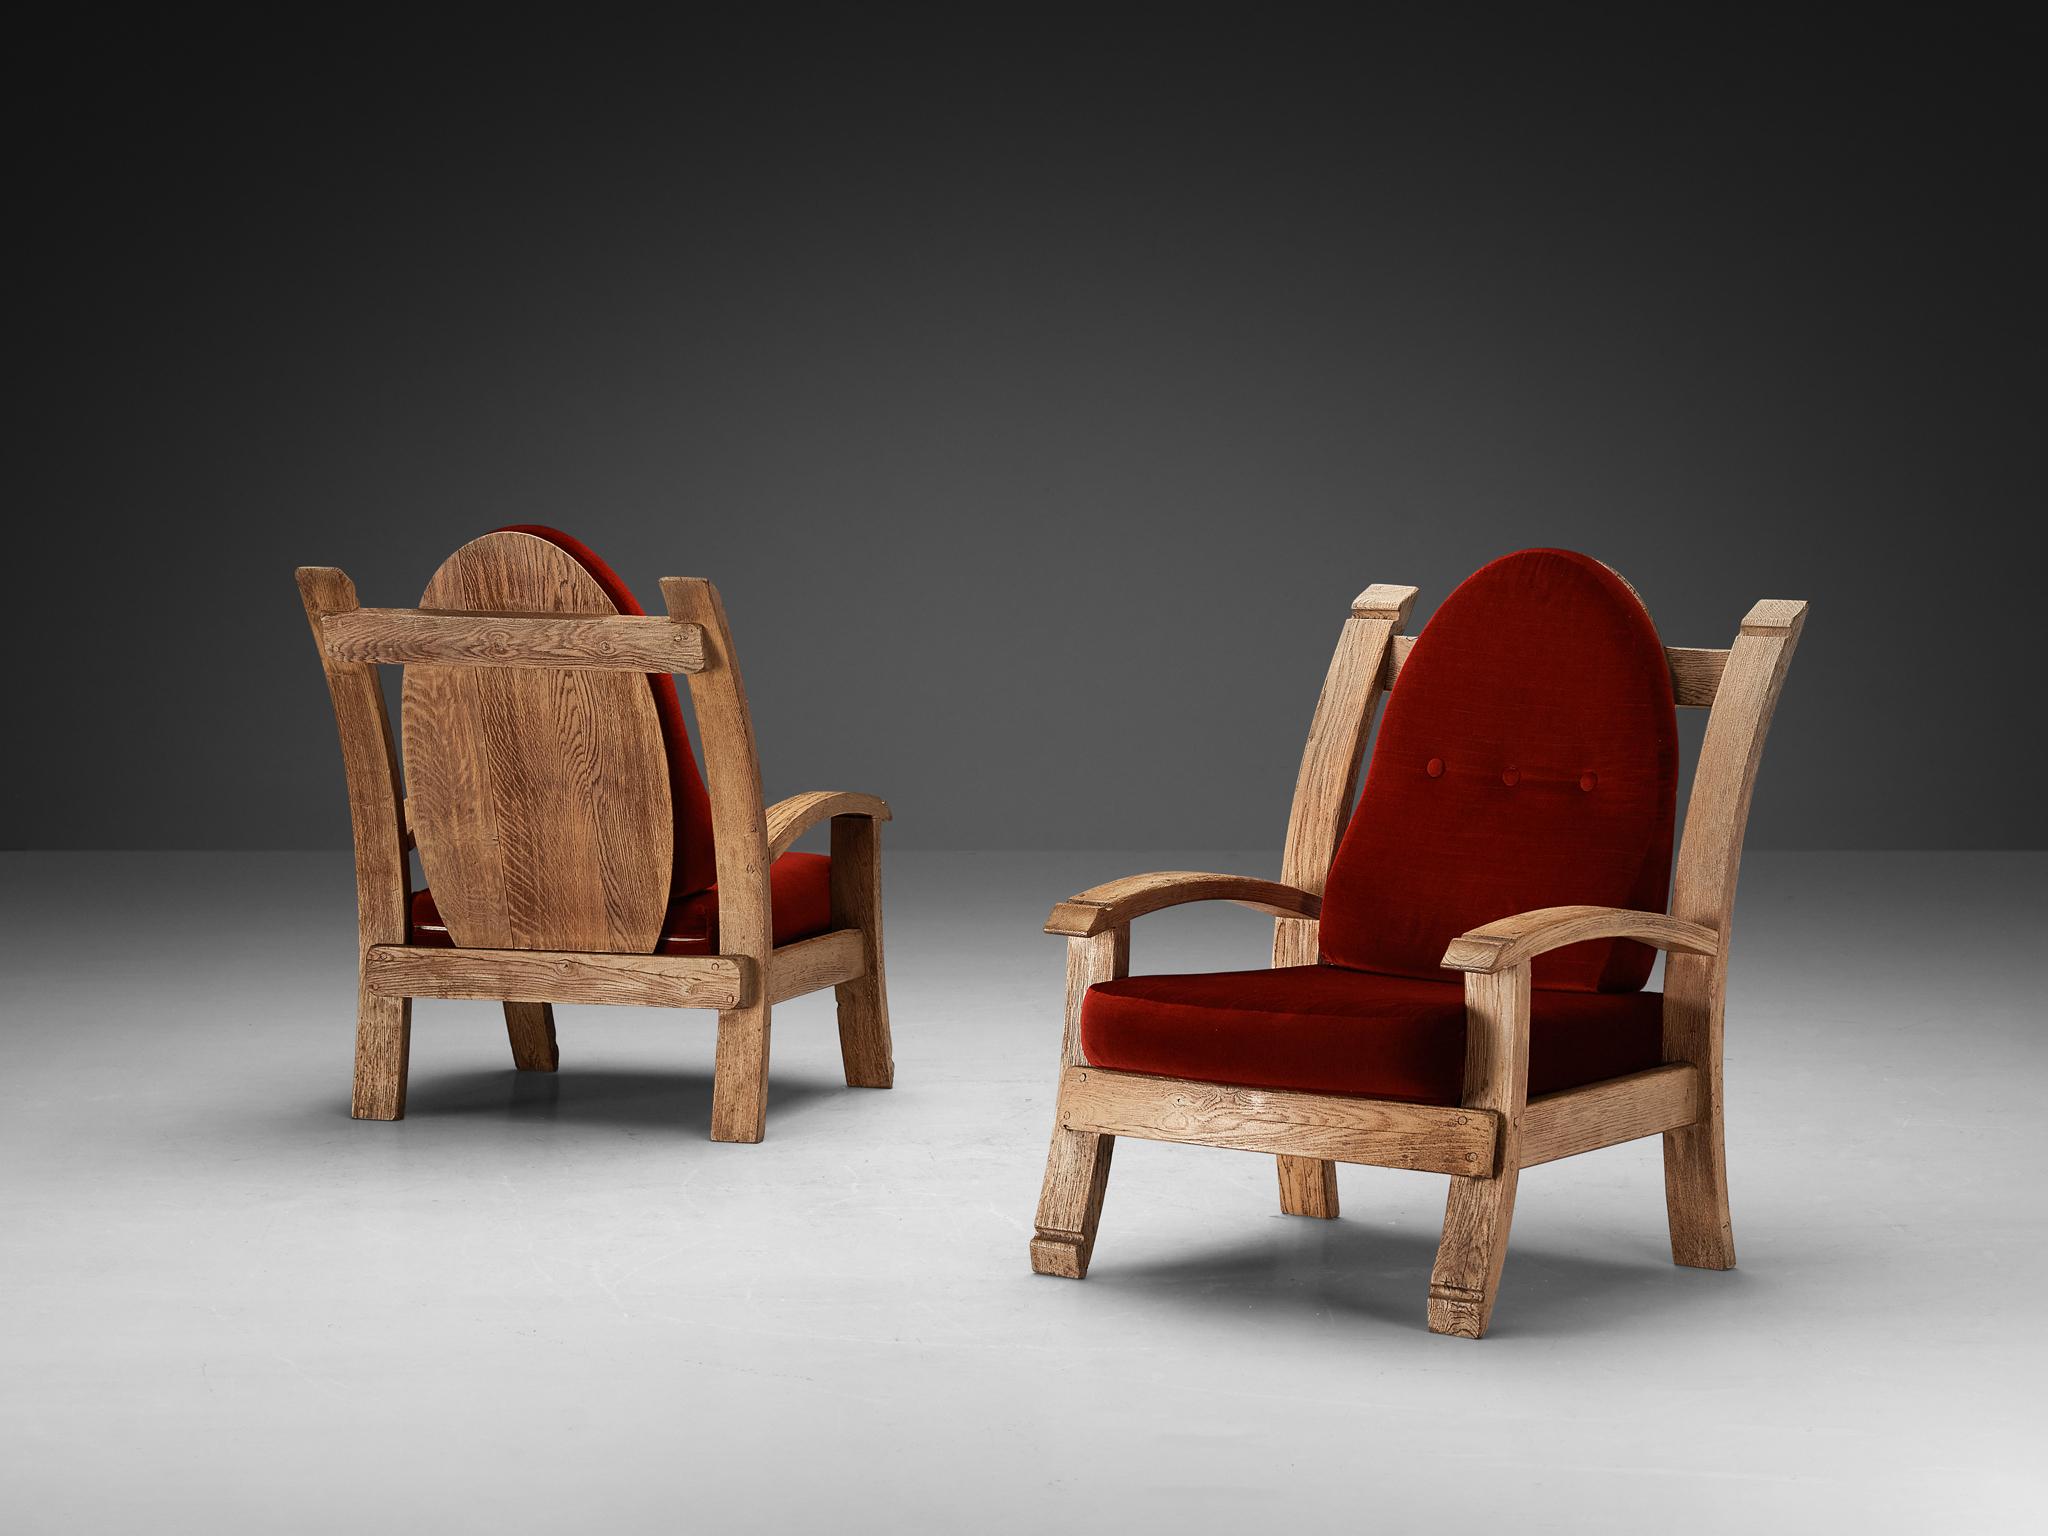 Pair of lounge chairs, oak and fabric, France, 1940s

Charming French Art Deco armchairs made of oak. The design features bulky forms with elements of a throne, such as the high, almost majestic backrests that slightly leans backwards. The arms